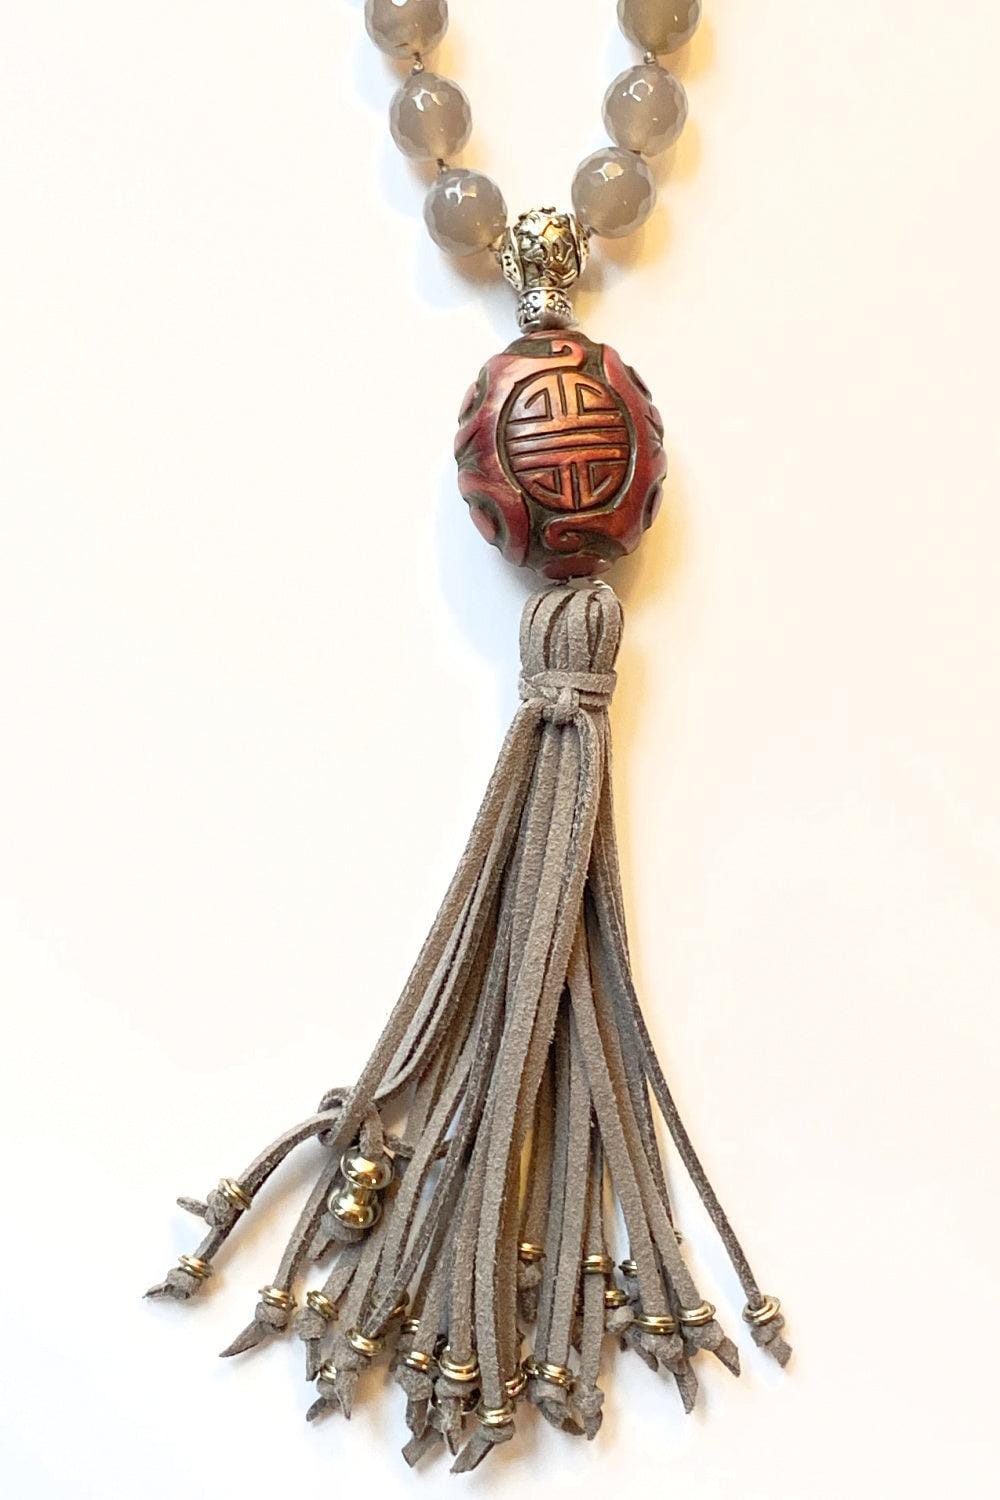 Good Fortune Mala Necklace